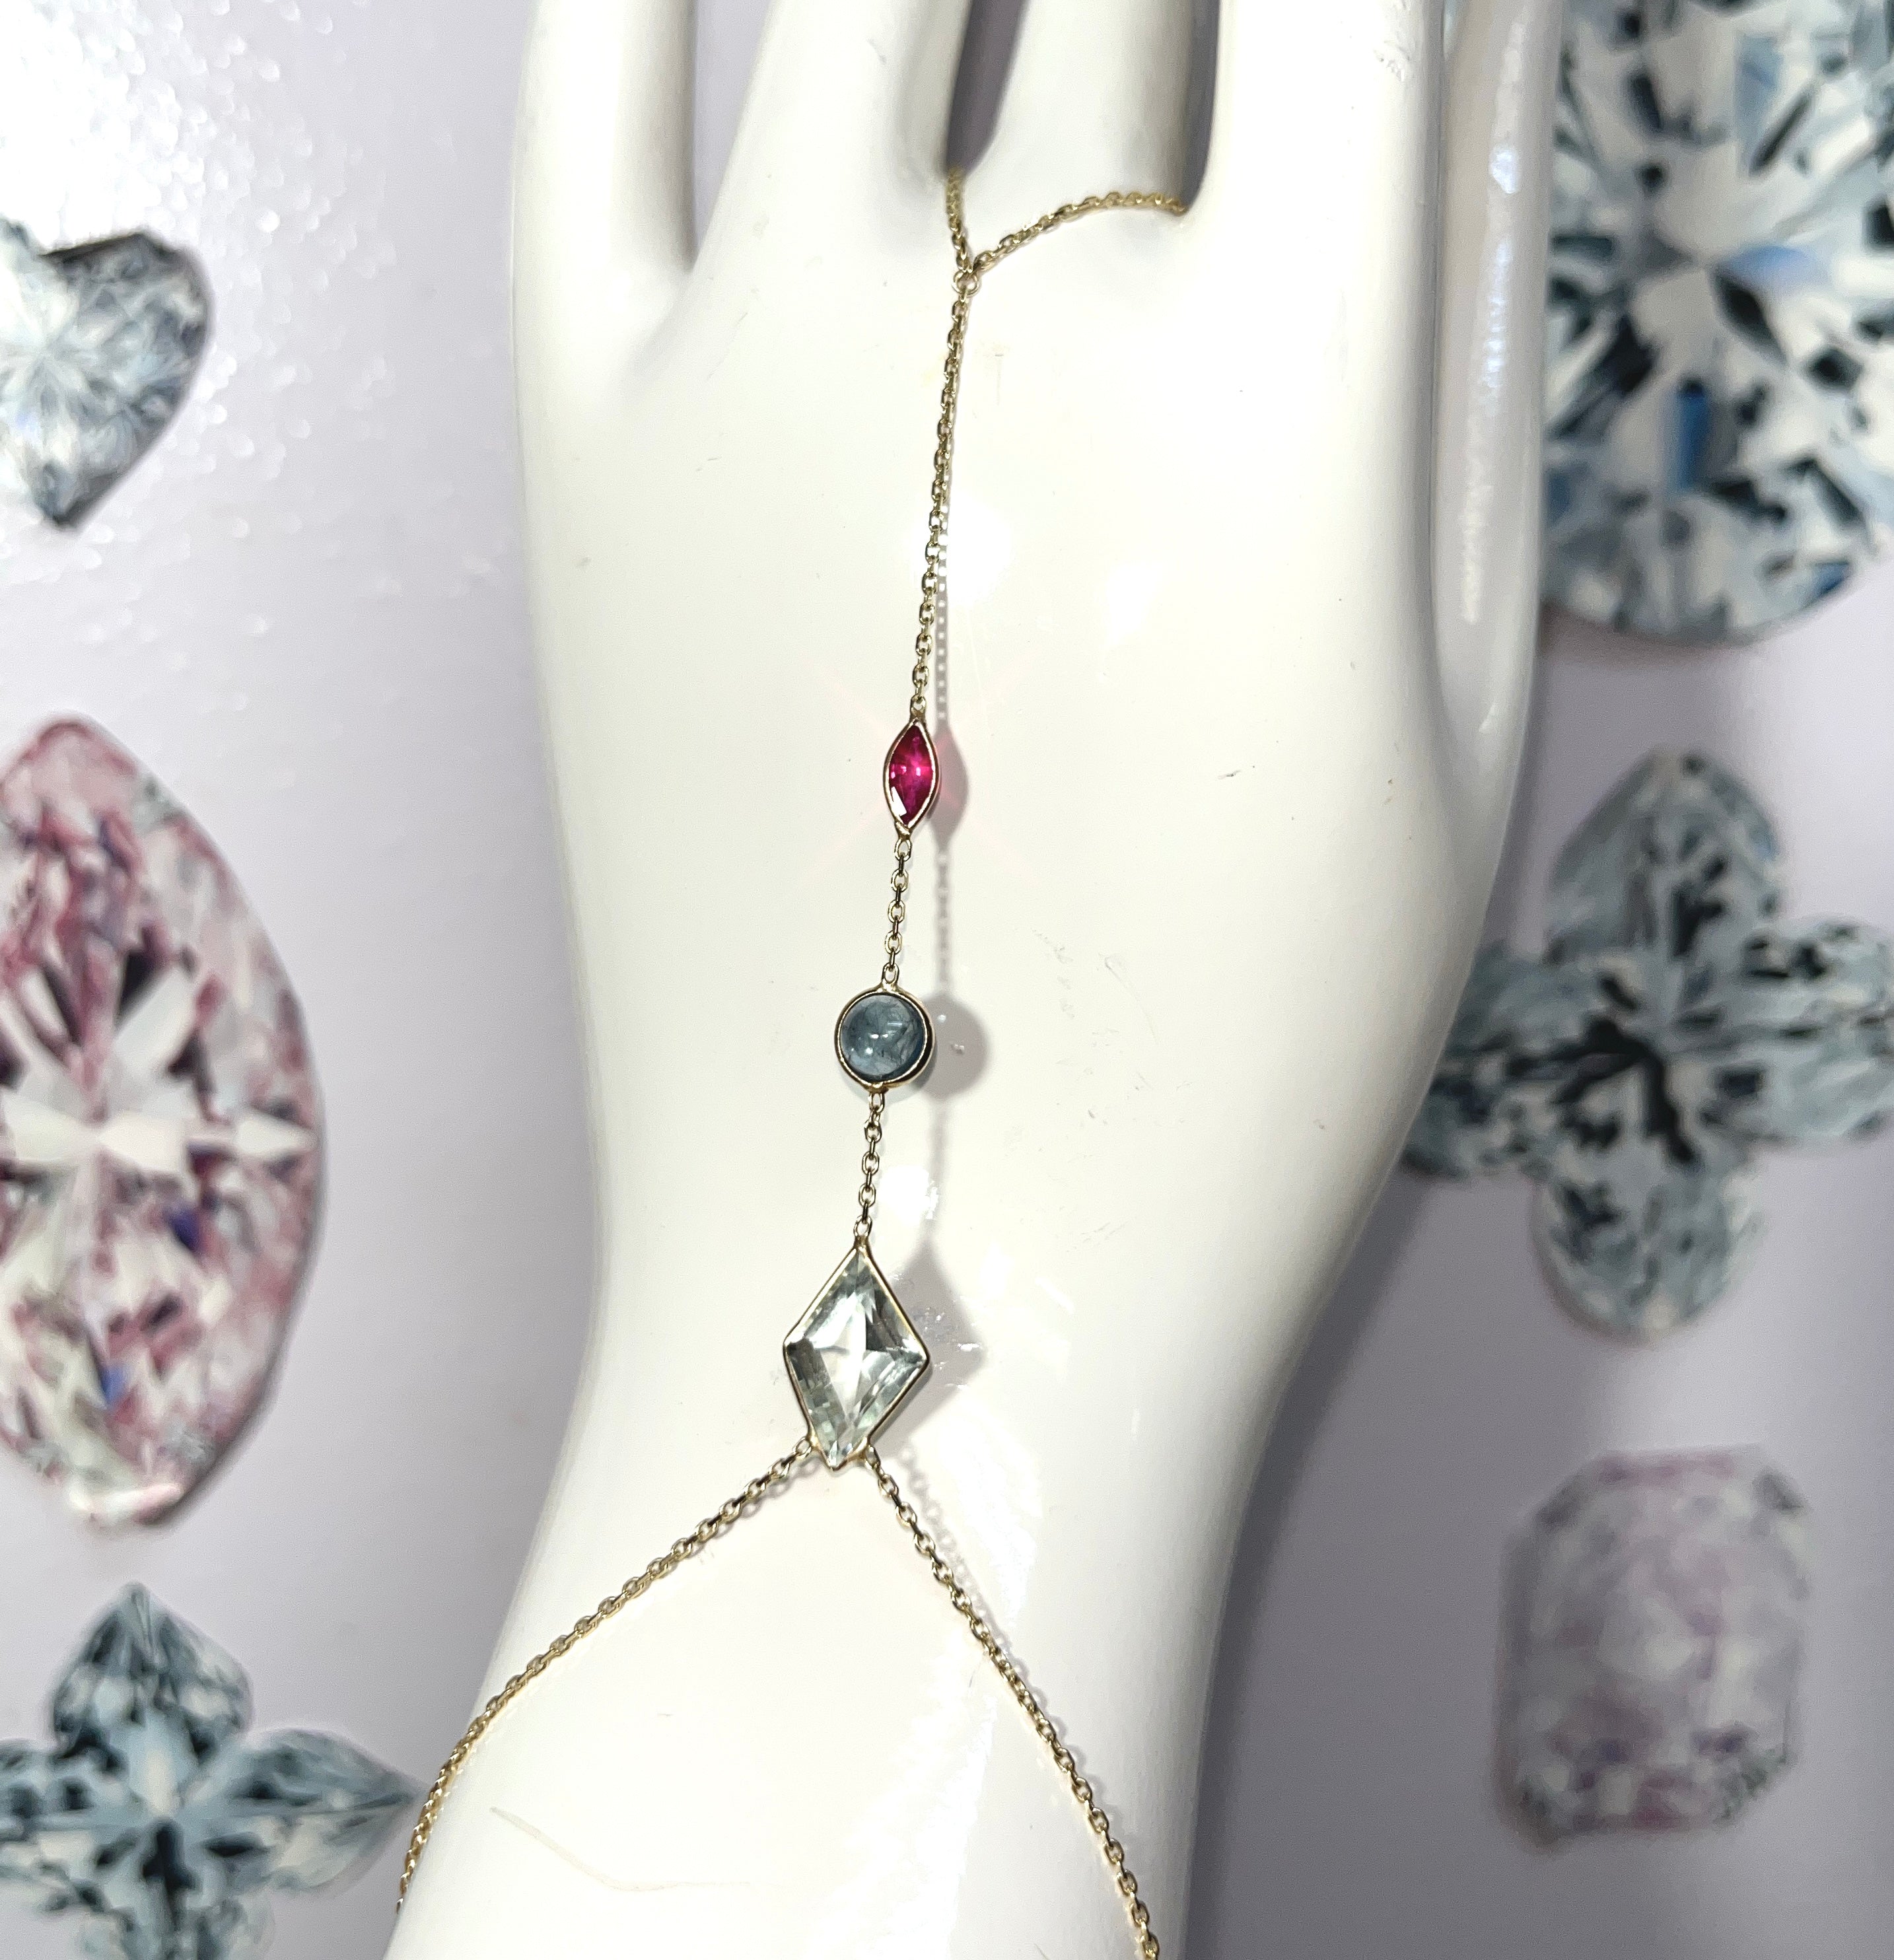 Aquamarine Sapphire and Ruby Handchain in solid 14k Yellow Gold